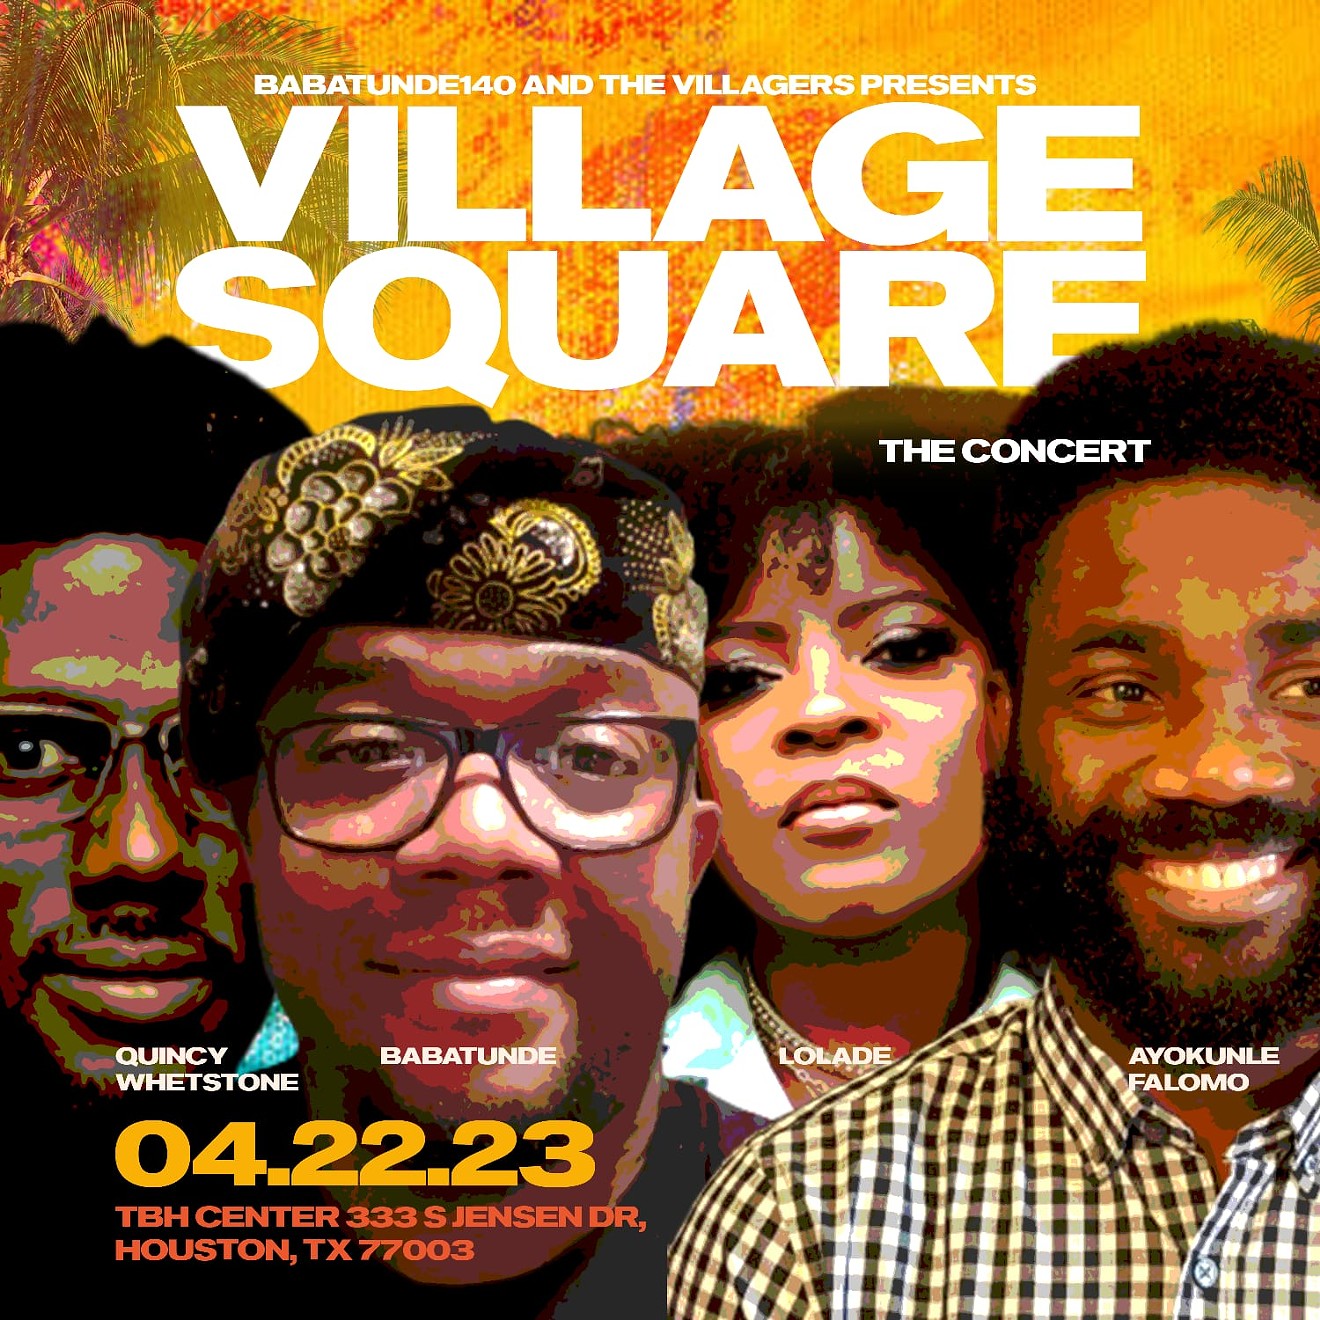 Enjoy an evening of live African music at the Village Square concert